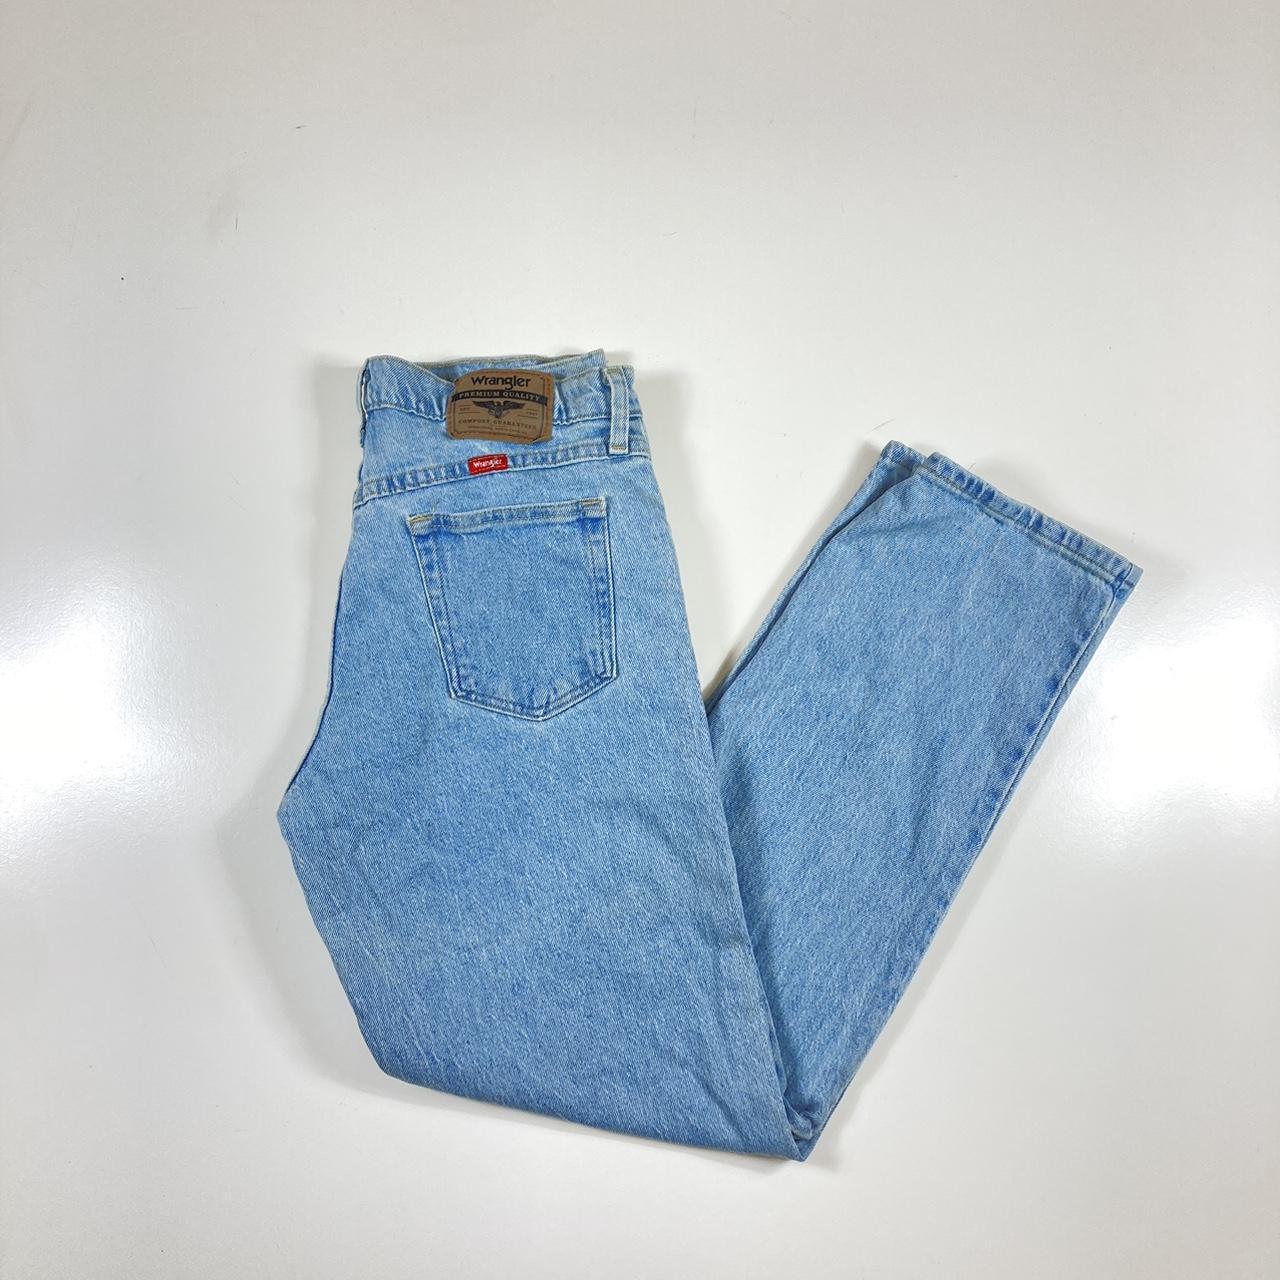 Wrangler washed blue jeans Size 29x30 These pants... - Depop